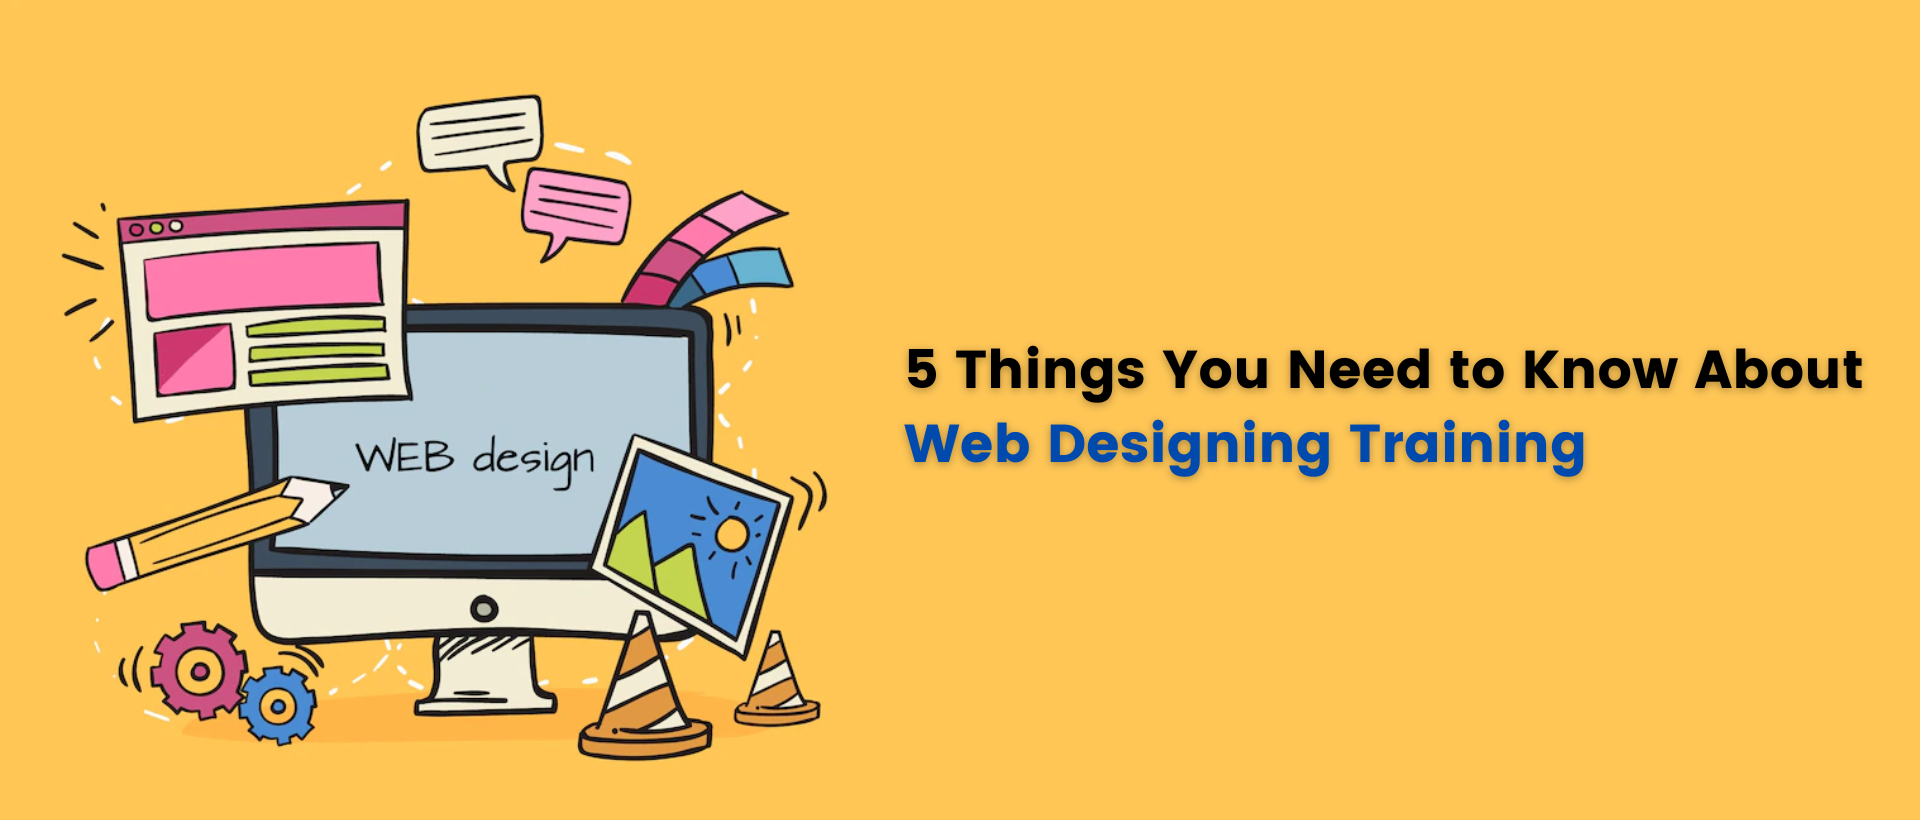 5 Things You Need to Know About Web Designing Training